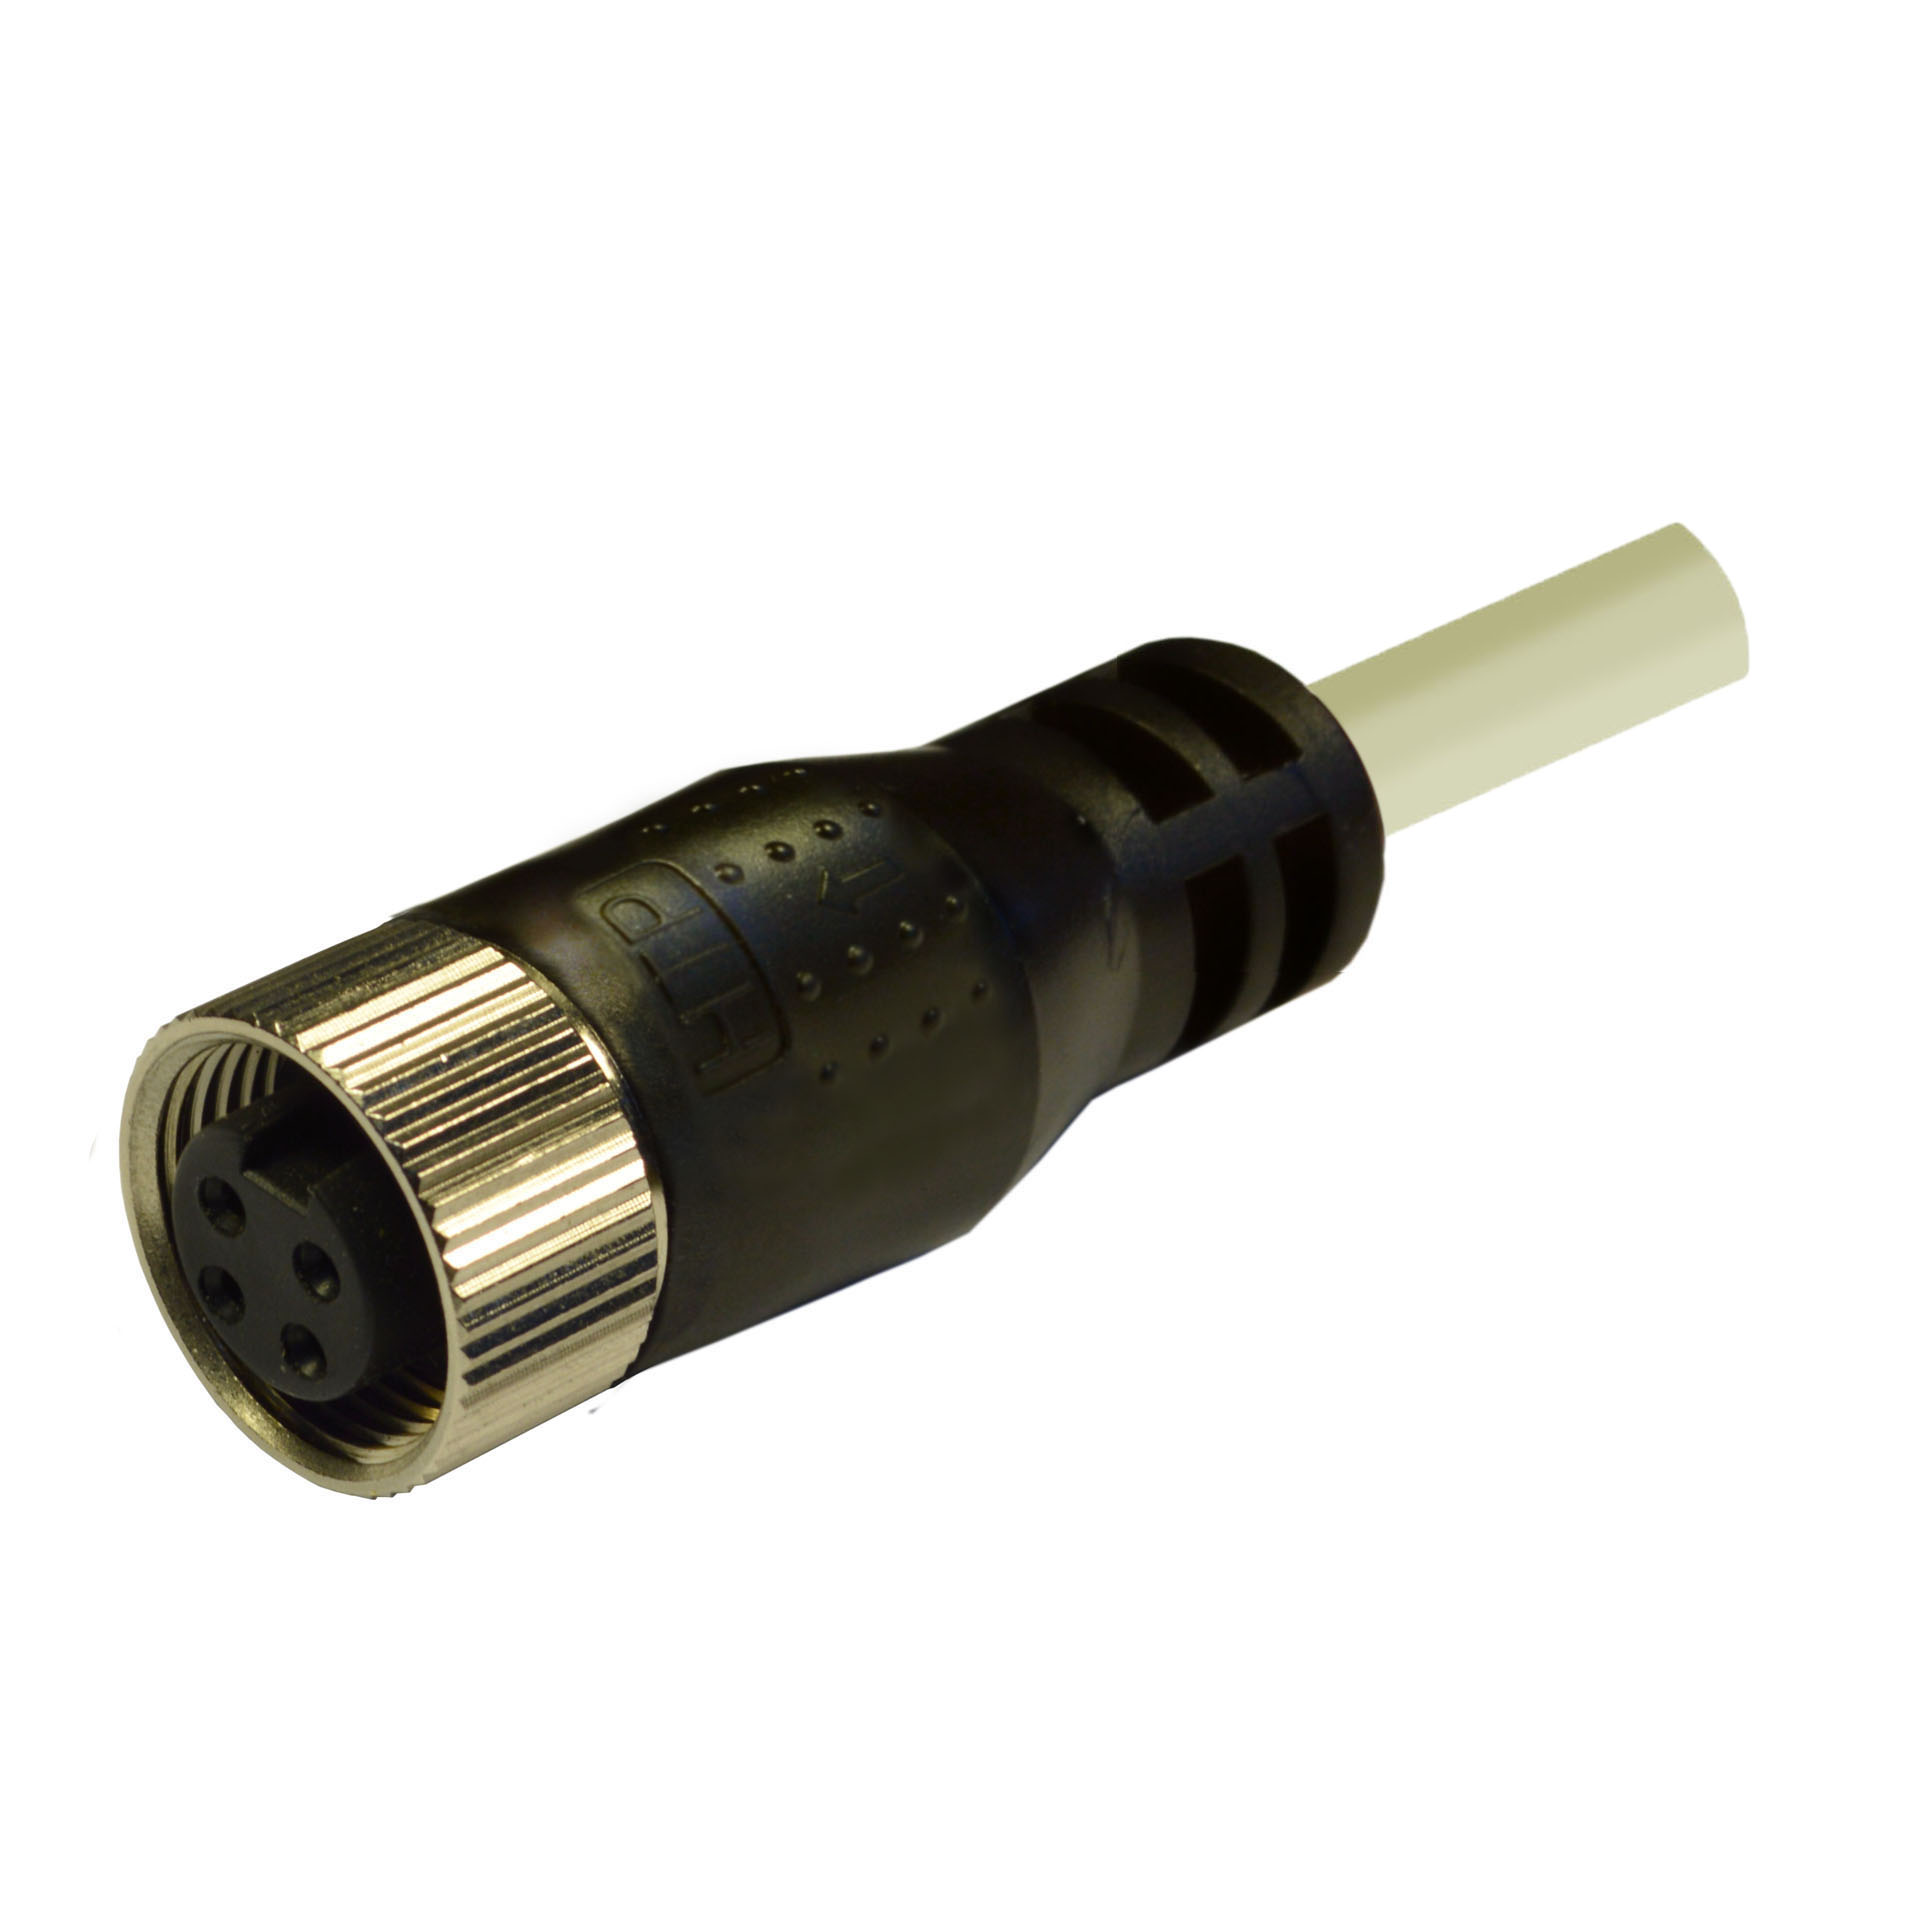 7/8 connector, female, 180°, with 4m of cable 4x2,5 shielded, colour grey